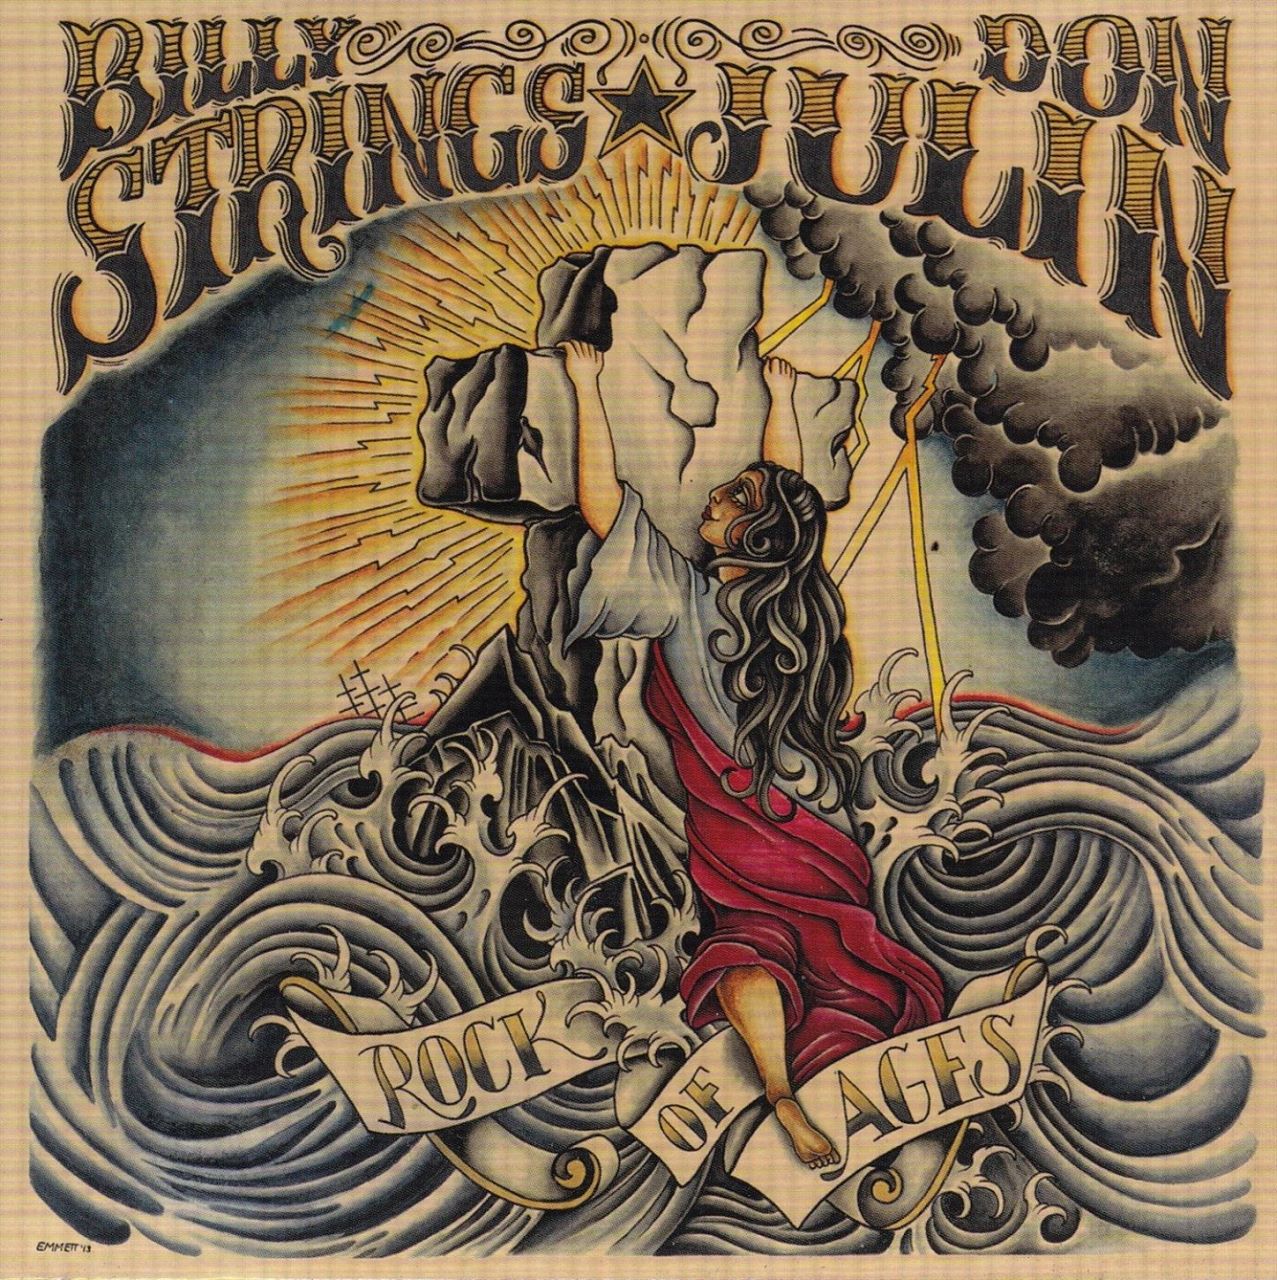 Billy Strings & Don Julin - Rock Of Ages cover album